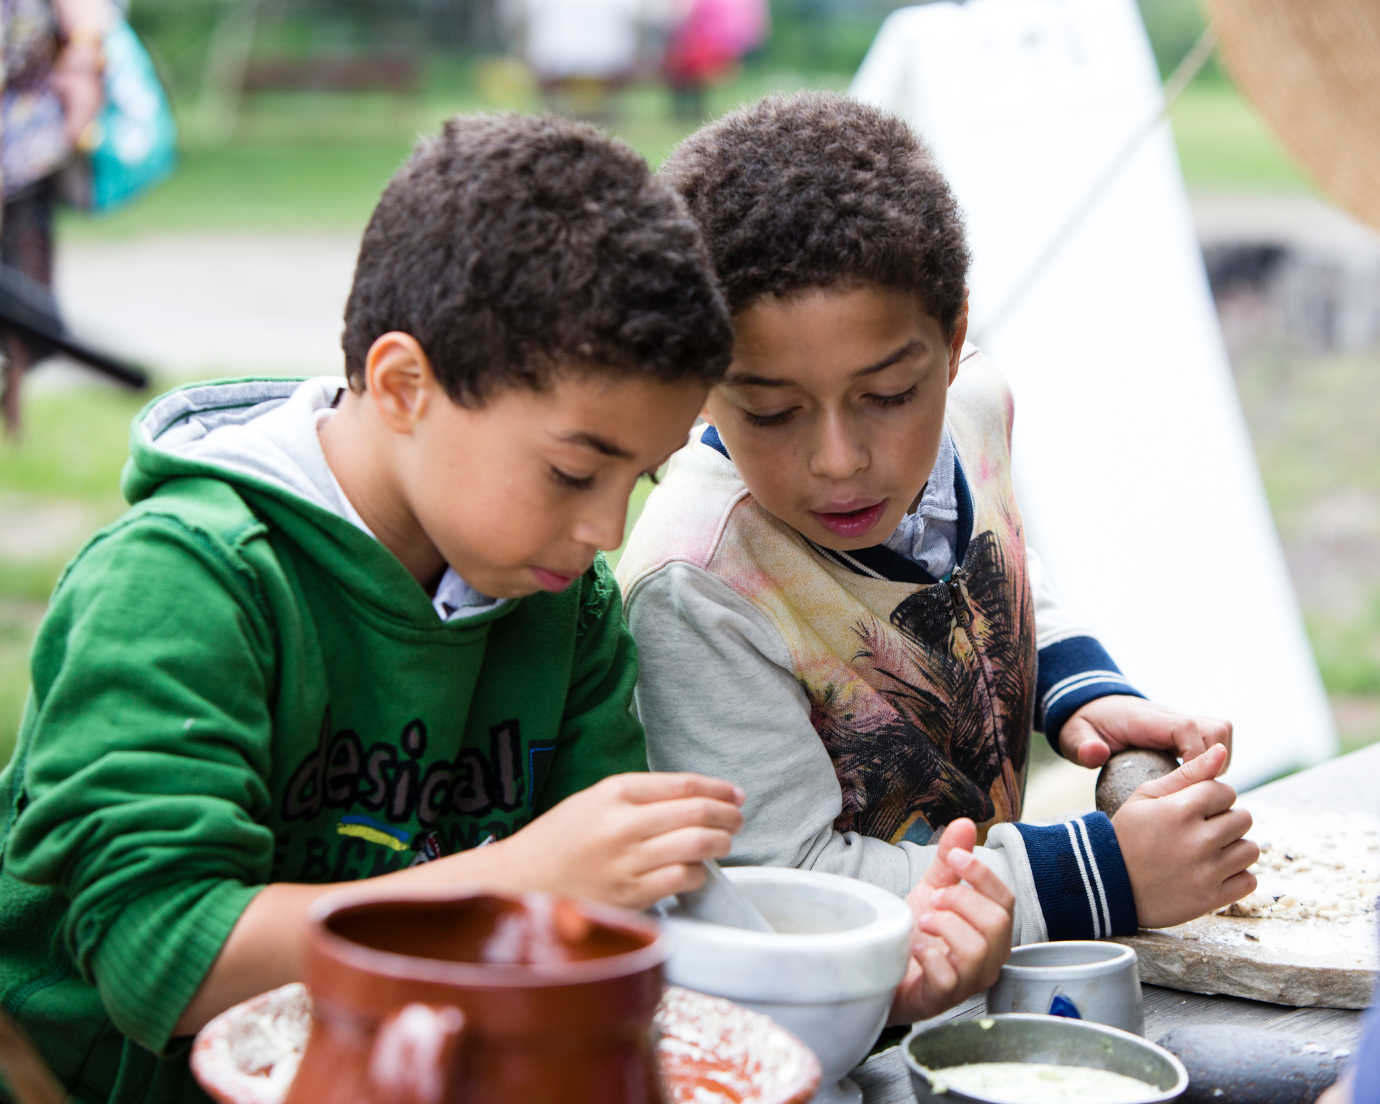 Two children examine a mortar and pestle—commonly used in eighteenth-century cooking and medicine. Image courtesy of Historic Hudson Valley.